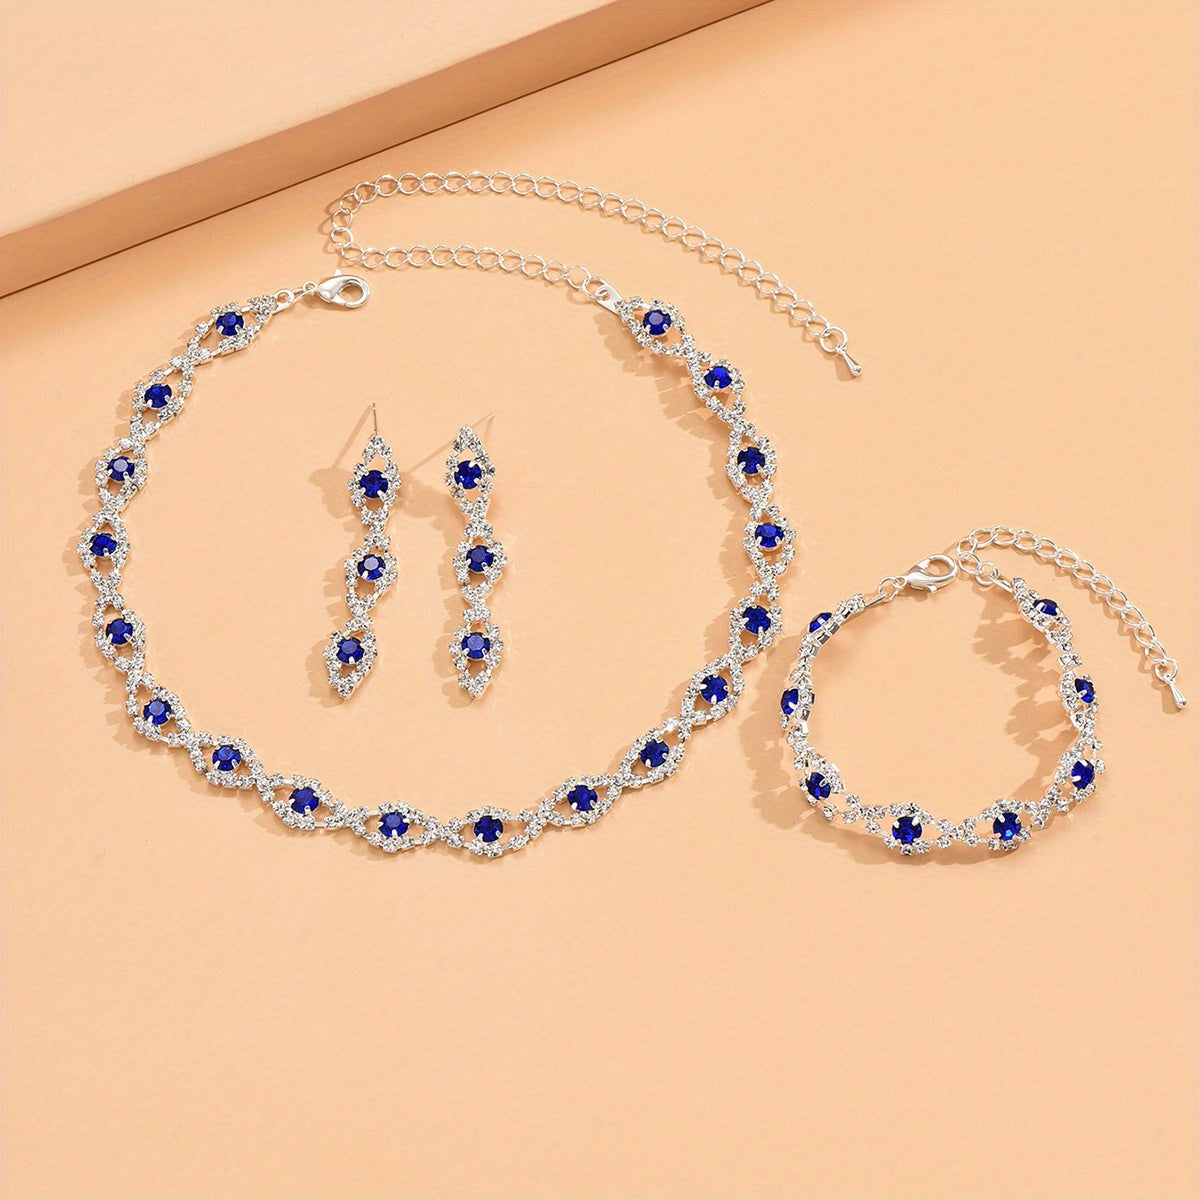 4pcs Trendy Devil Eye Jewelry Set - Necklace, Bracelet, and Rings with Rhinestone Inlay and Multi-Color Options - Perfect for Parties and Special Occasions